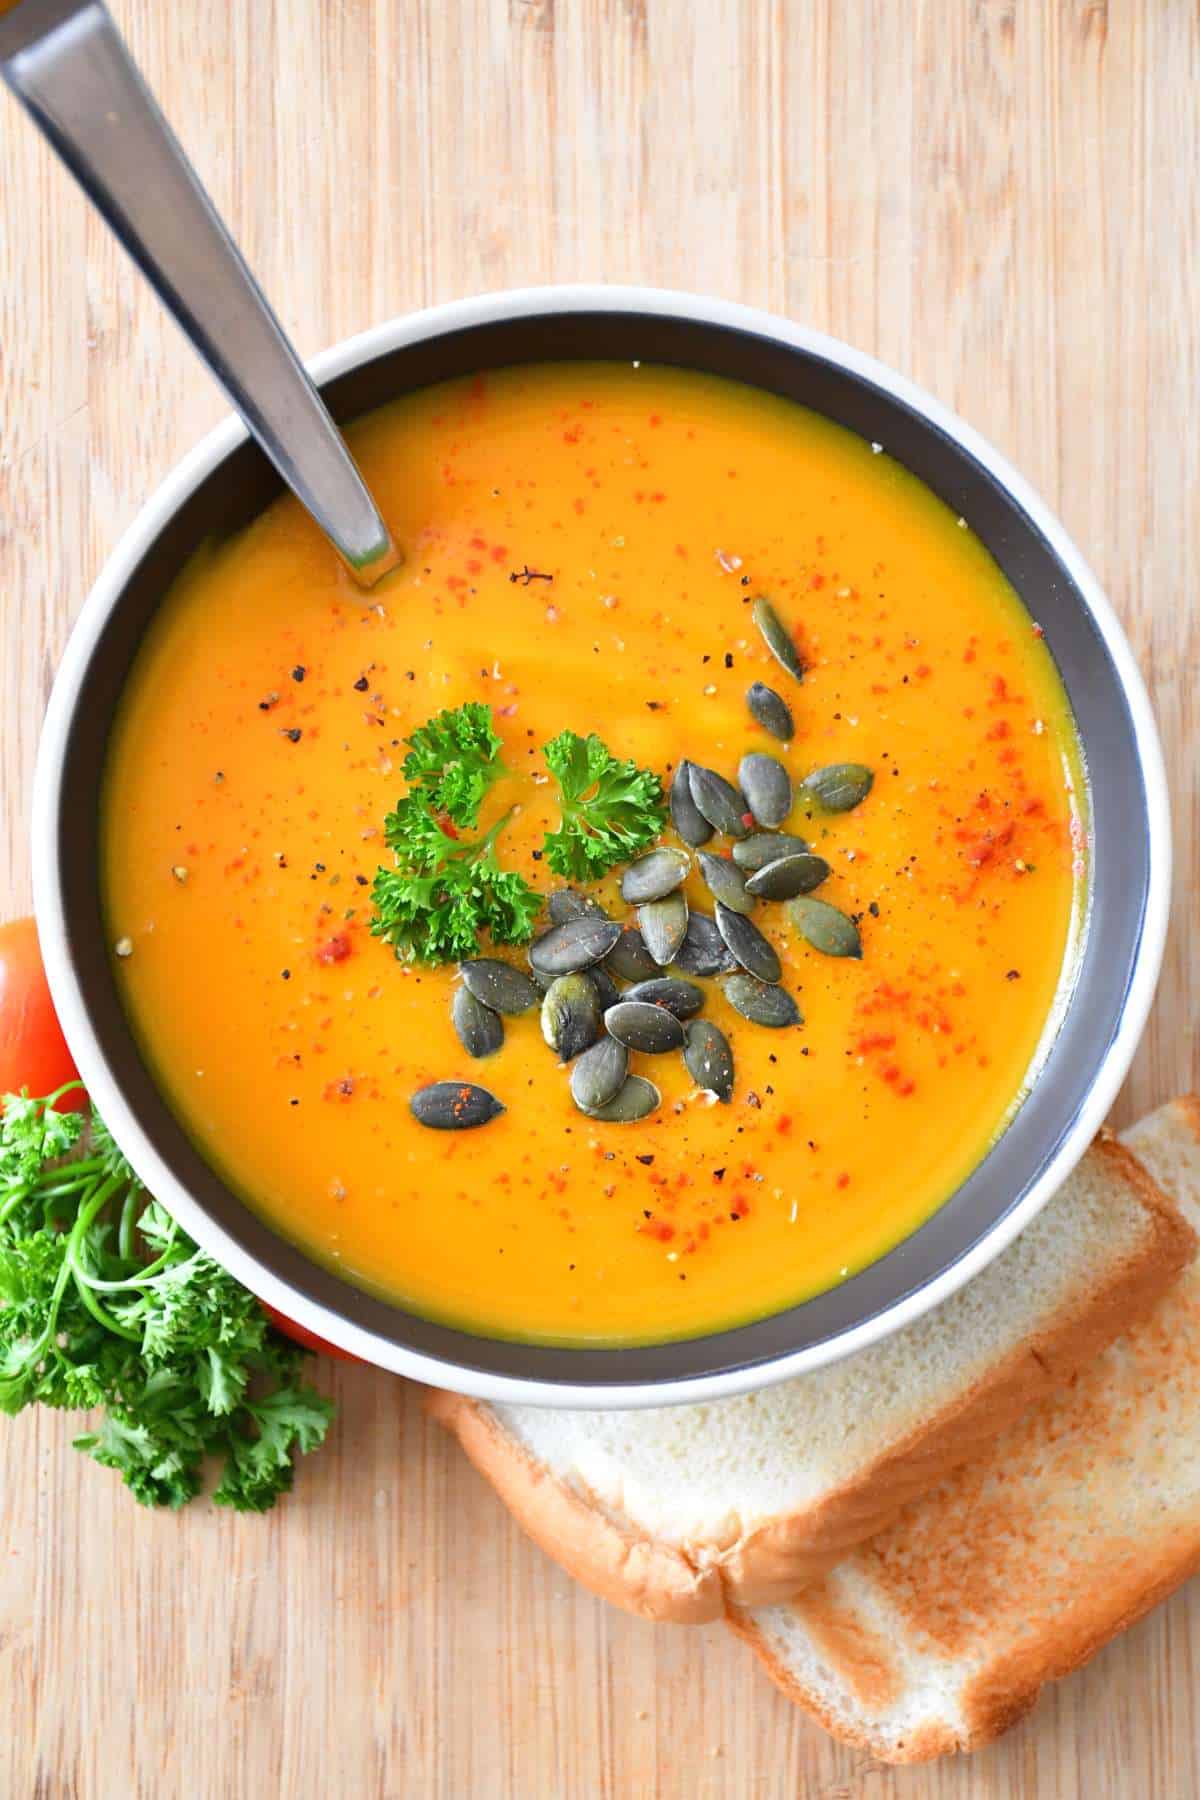 A smoky version of the low sodium butternut squash soup with liquid smoke, spanish smoked paprika and pumpkin seeds.